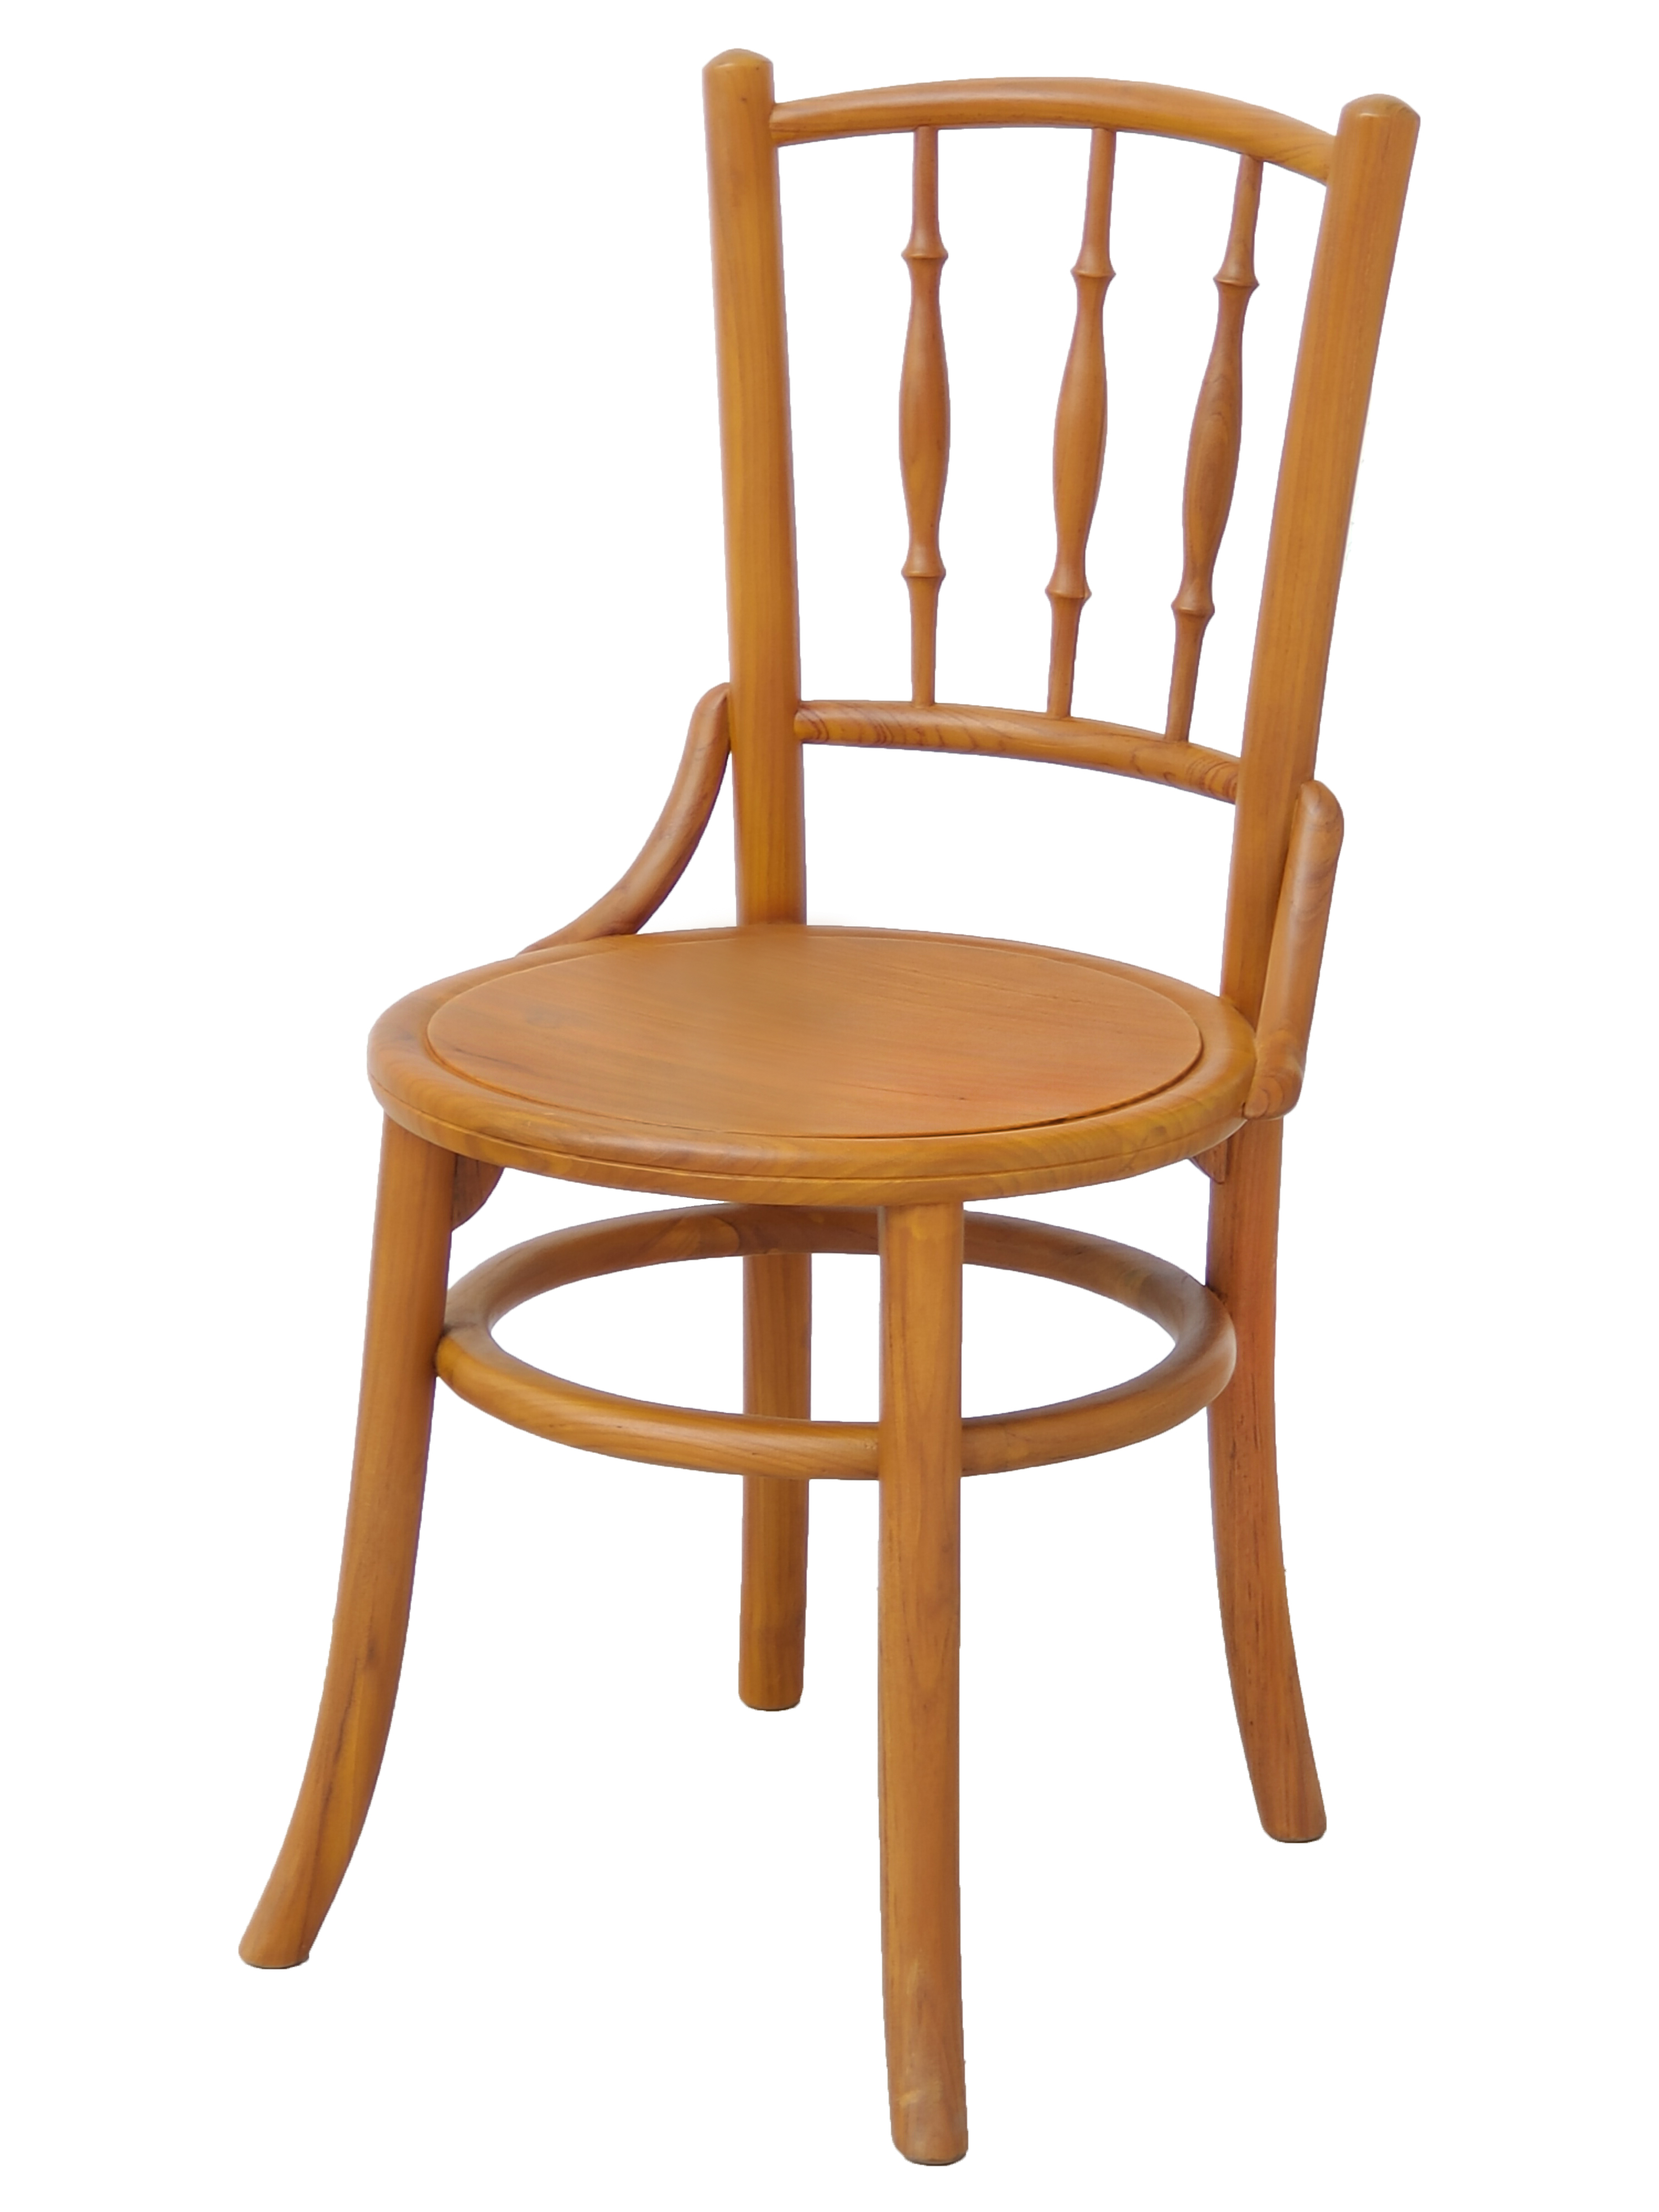 Kopitiam Dining Chair (Natural) Dining Chairs Chairs Malaysia, Selangor